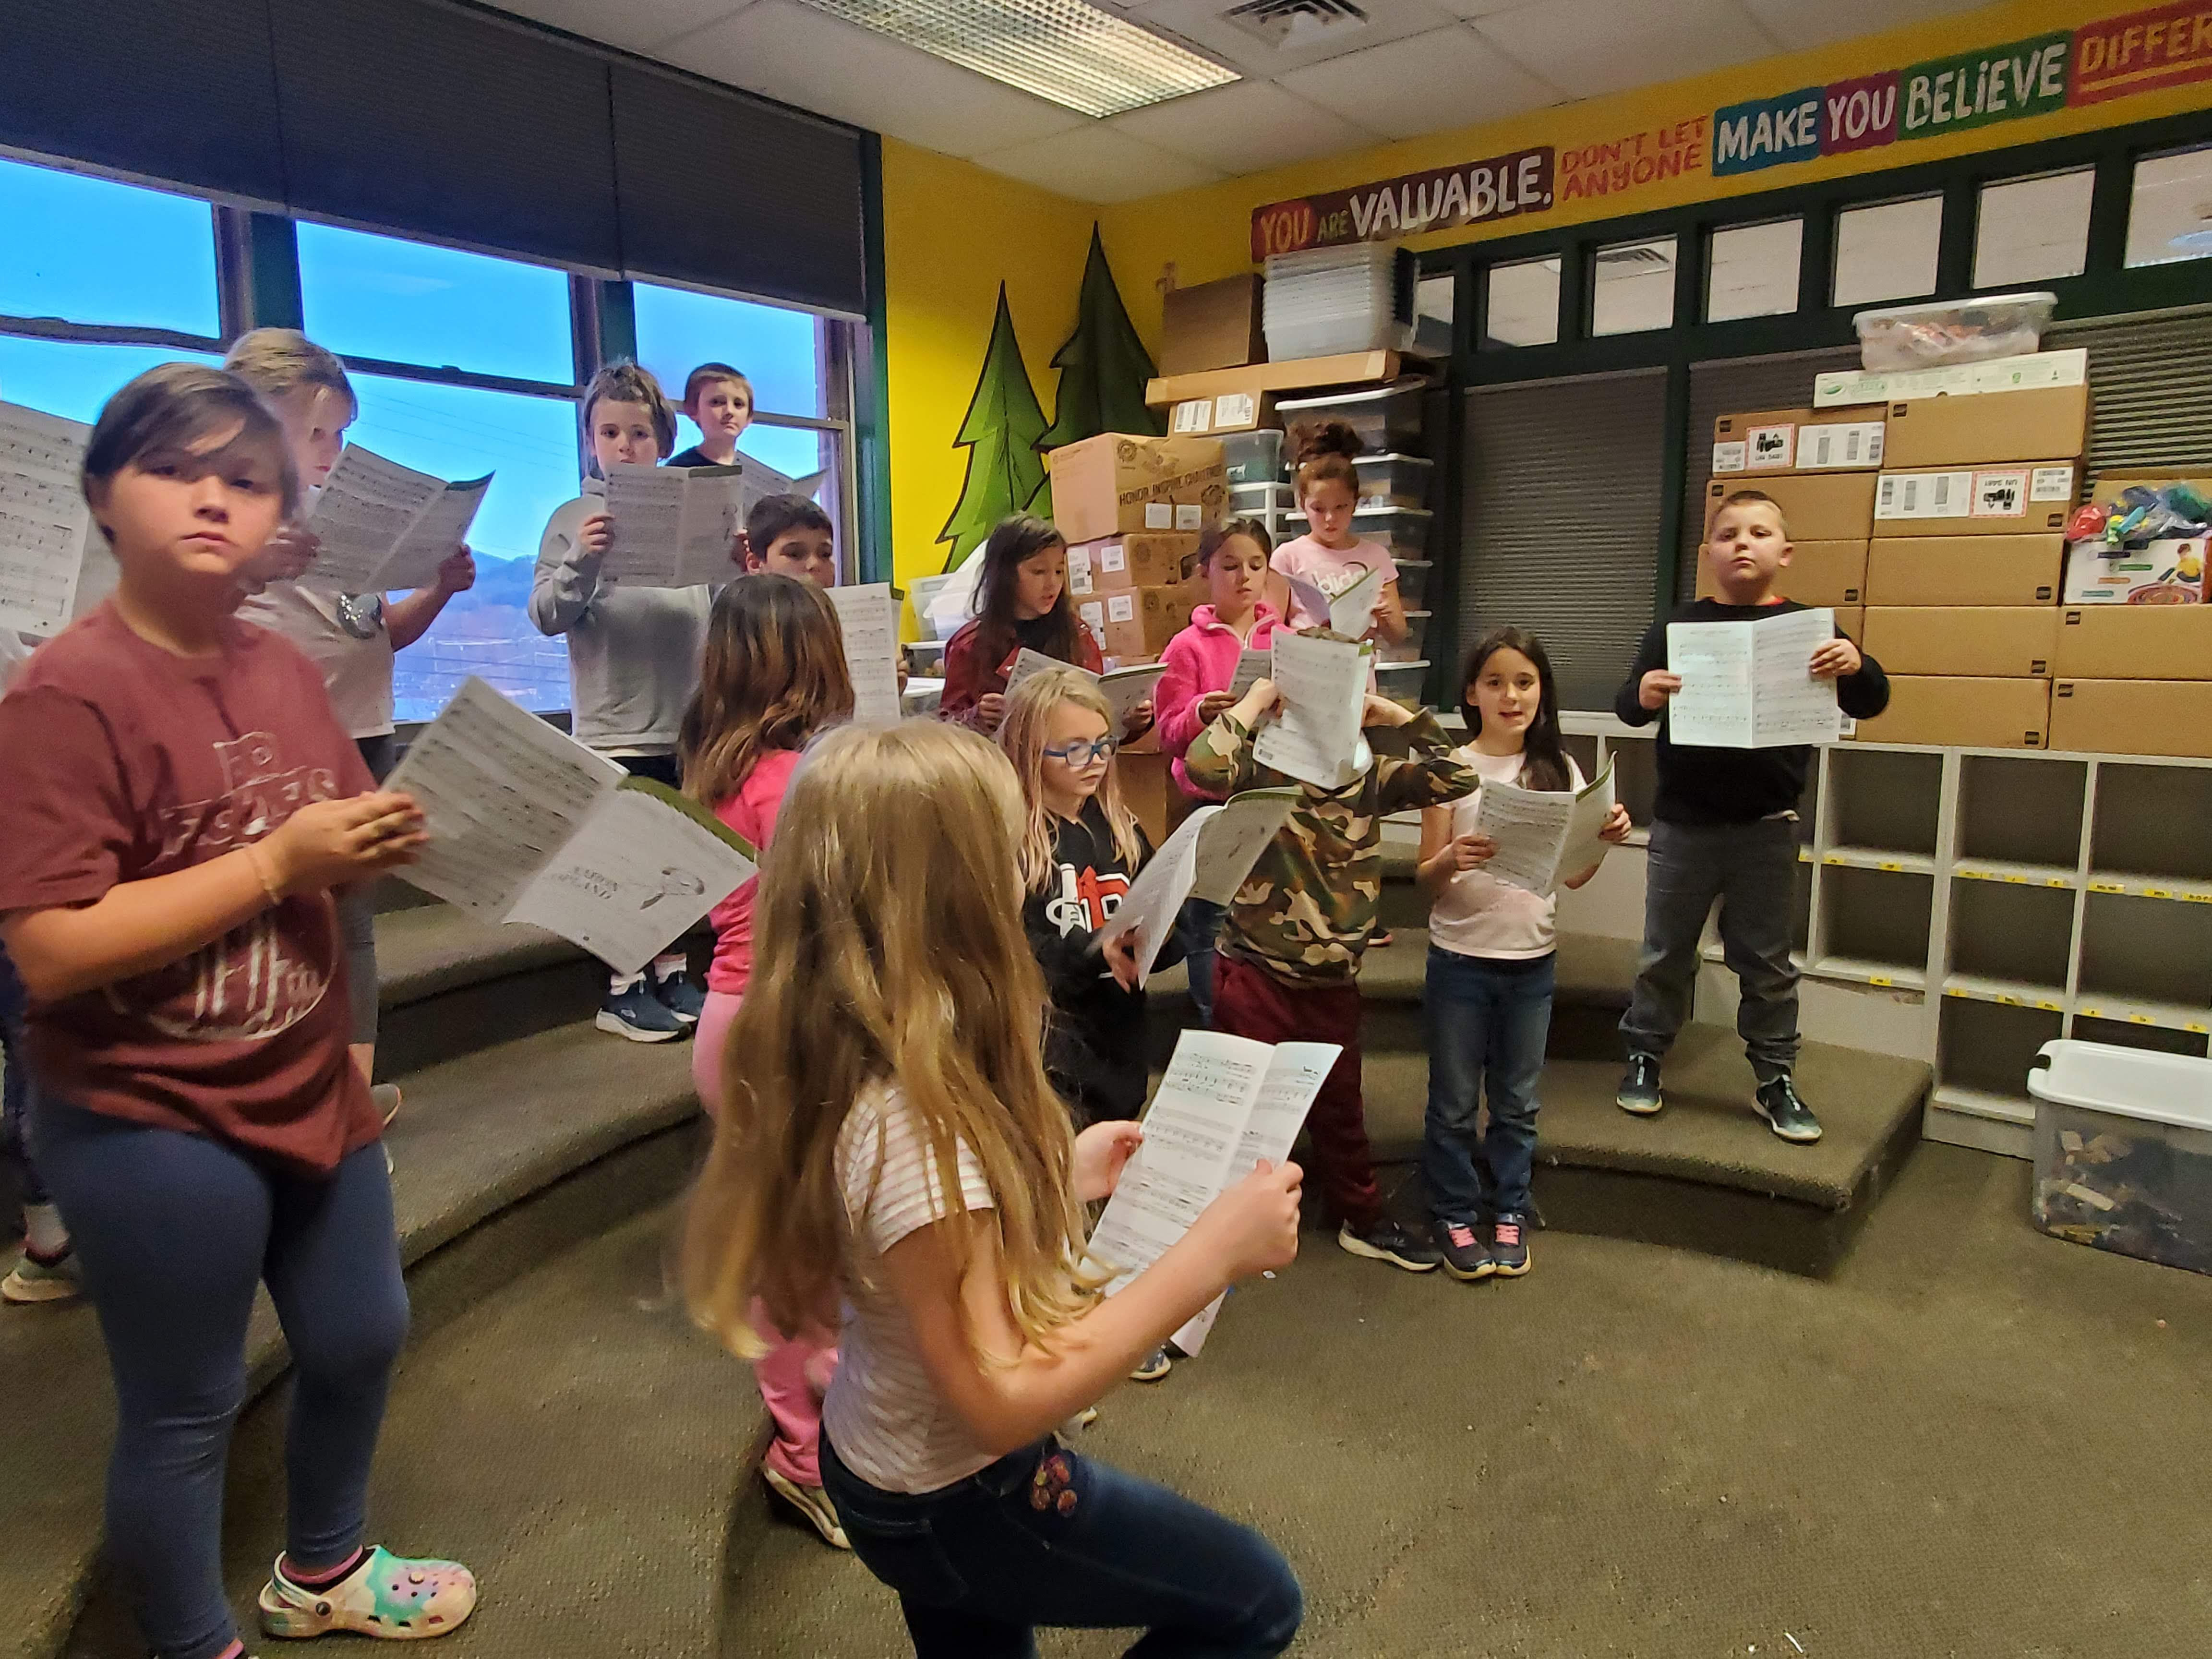 Students rehearse together in Macon County, NC